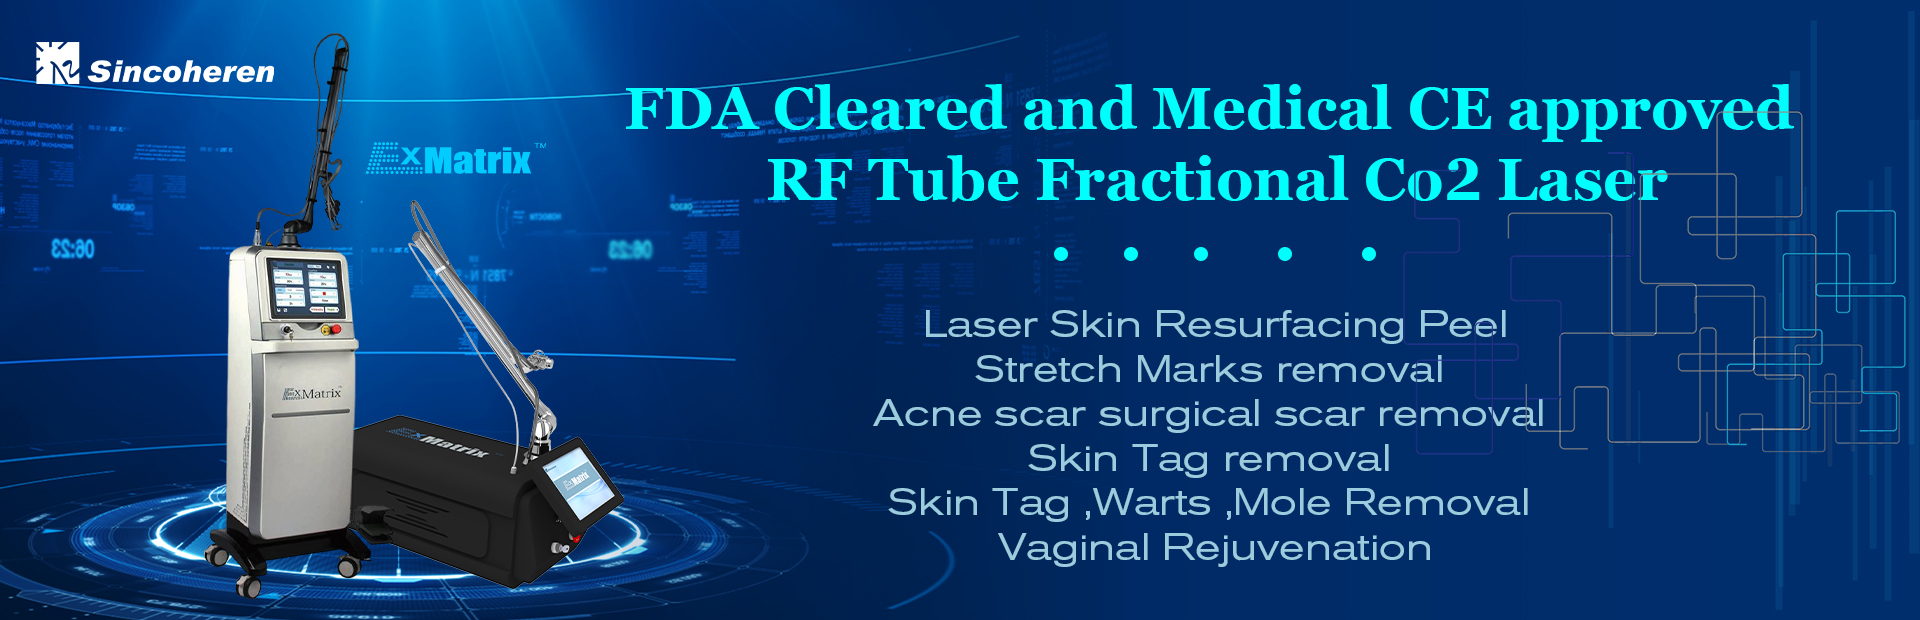 Medical CE and FDA cleared Fractional Co2 Laser